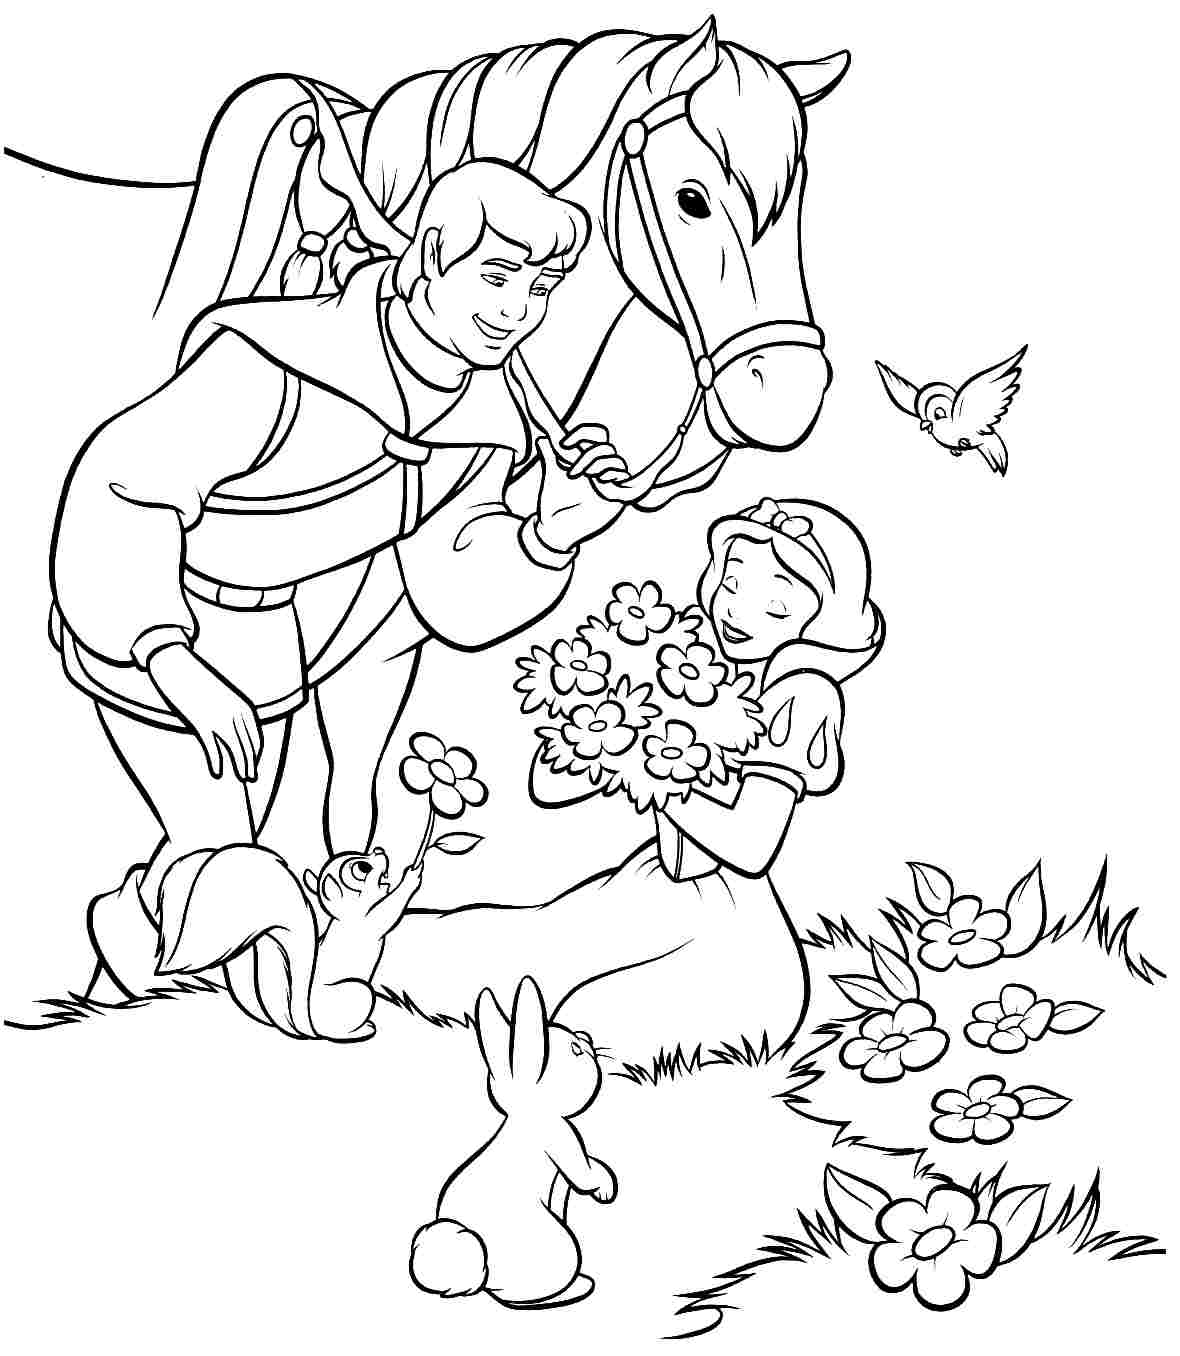 Disney Princess Snow White Coloring Pages | Coloring Online